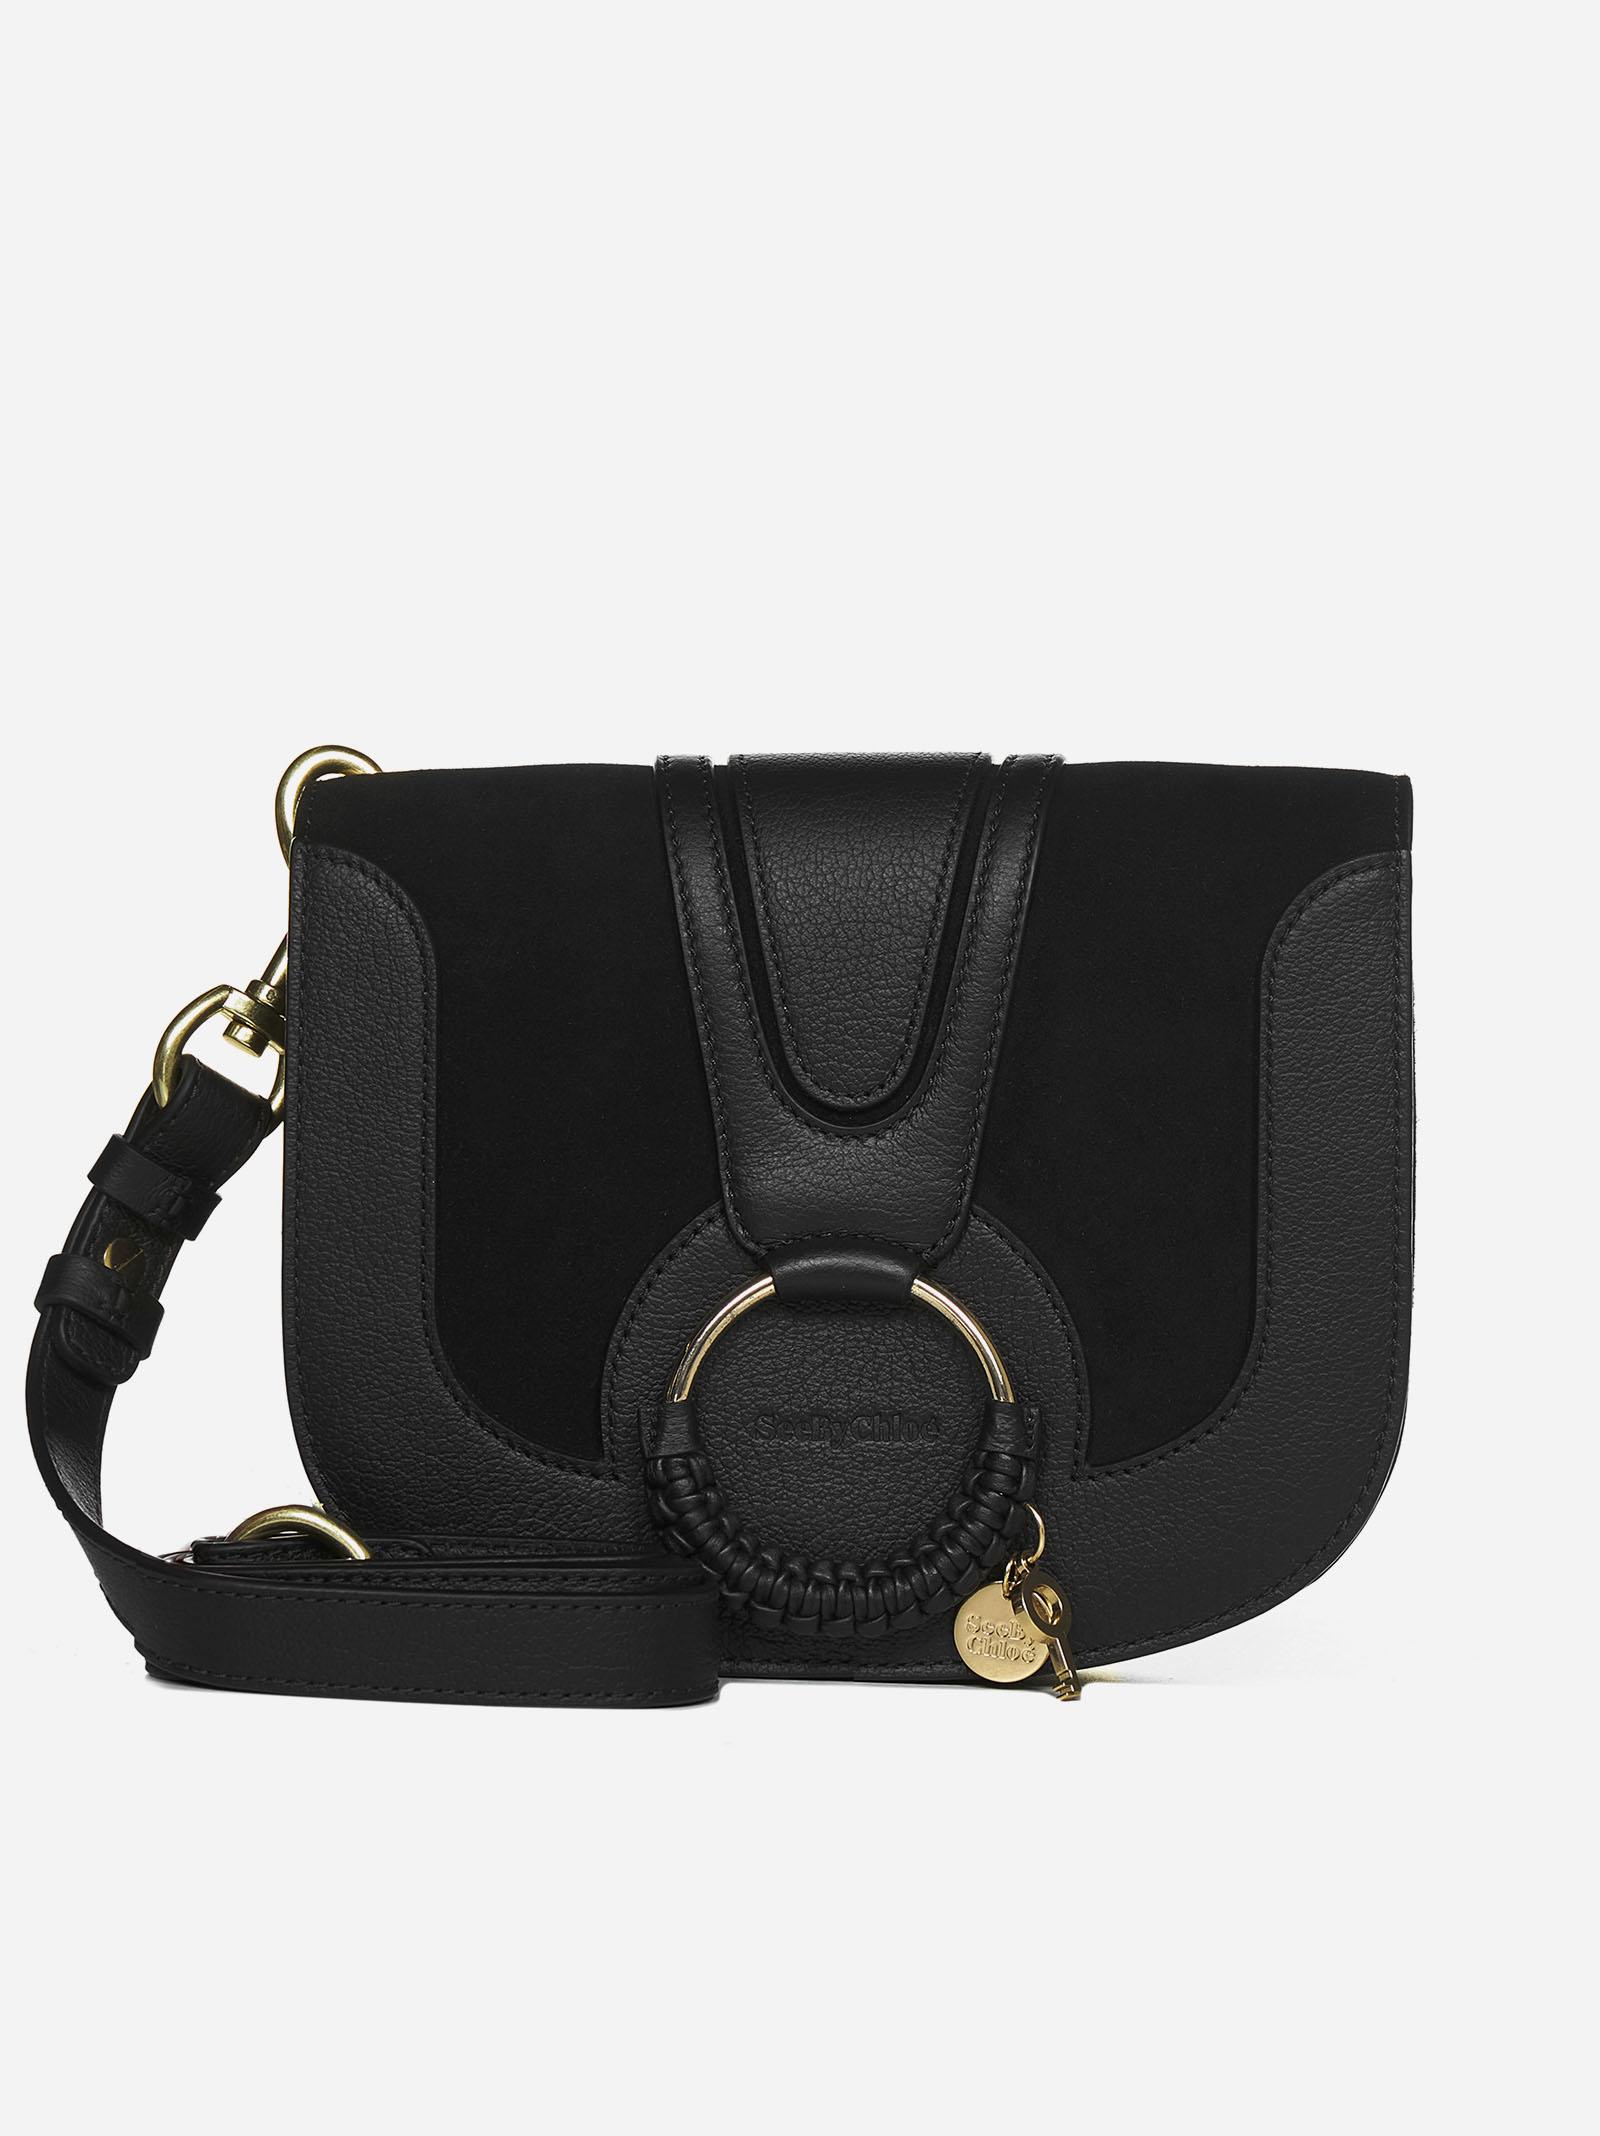 See By Chloé Hana Leather And Suede Crossbody Bag in Black - Save 17% | Lyst